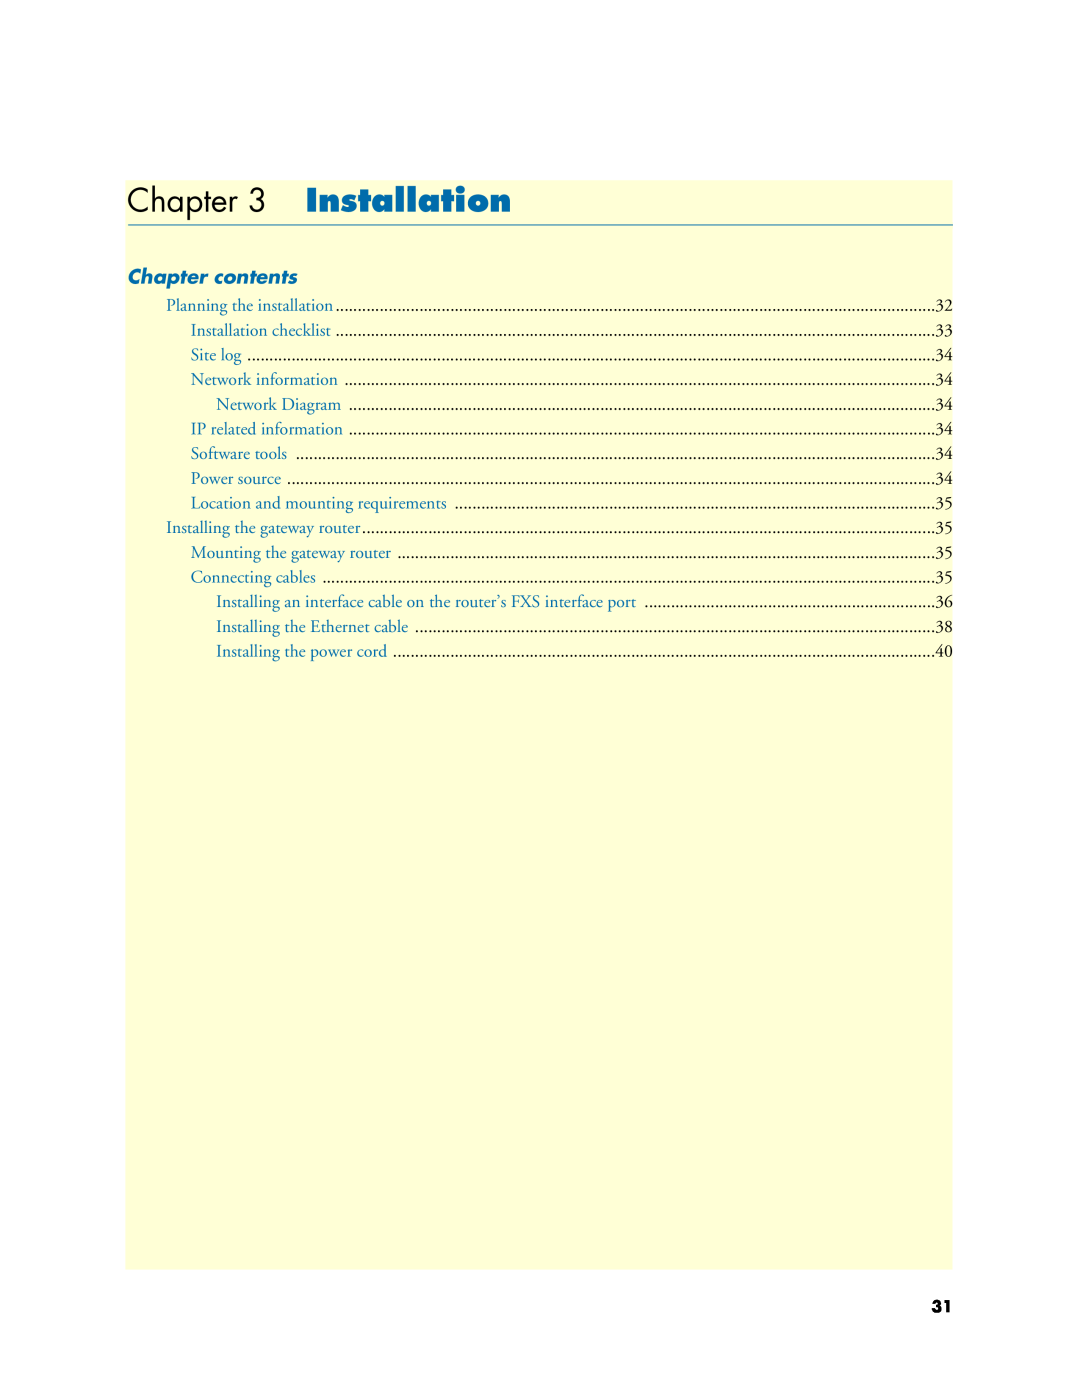 Patton electronic 4110 manual Installation, Chapter contents 